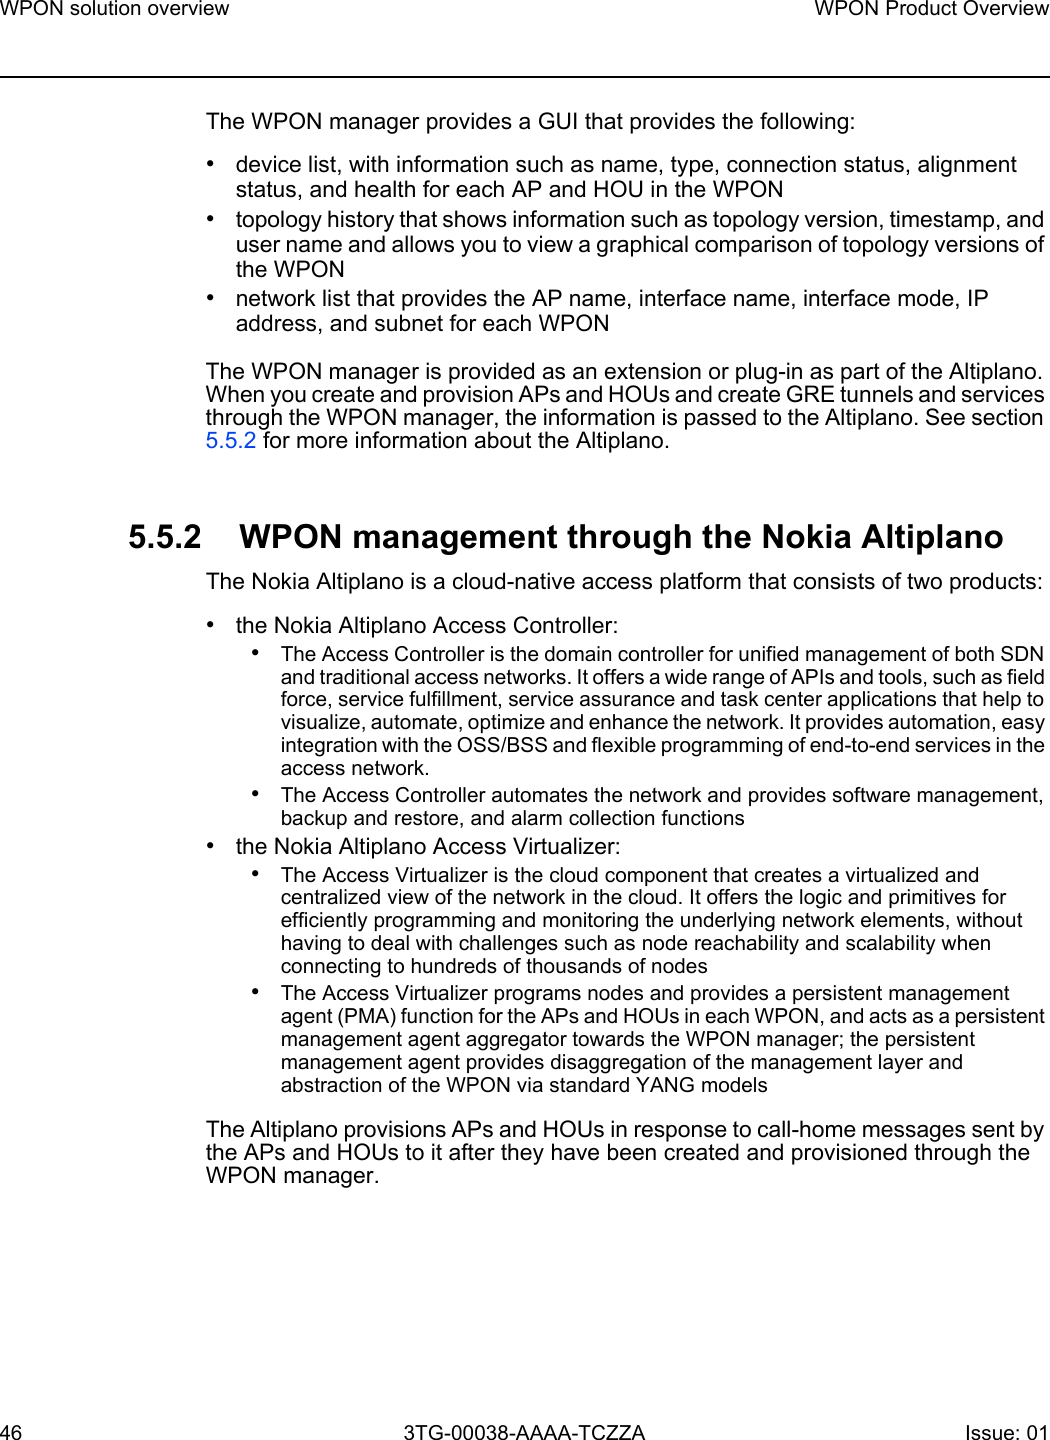 WPON solution overview46WPON Product Overview3TG-00038-AAAA-TCZZA Issue: 01 The WPON manager provides a GUI that provides the following:•device list, with information such as name, type, connection status, alignment status, and health for each AP and HOU in the WPON•topology history that shows information such as topology version, timestamp, and user name and allows you to view a graphical comparison of topology versions of the WPON•network list that provides the AP name, interface name, interface mode, IP address, and subnet for each WPONThe WPON manager is provided as an extension or plug-in as part of the Altiplano. When you create and provision APs and HOUs and create GRE tunnels and services through the WPON manager, the information is passed to the Altiplano. See section 5.5.2 for more information about the Altiplano.5.5.2 WPON management through the Nokia AltiplanoThe Nokia Altiplano is a cloud-native access platform that consists of two products: •the Nokia Altiplano Access Controller:•The Access Controller is the domain controller for unified management of both SDN and traditional access networks. It offers a wide range of APIs and tools, such as field force, service fulfillment, service assurance and task center applications that help to visualize, automate, optimize and enhance the network. It provides automation, easy integration with the OSS/BSS and flexible programming of end-to-end services in the access network.•The Access Controller automates the network and provides software management, backup and restore, and alarm collection functions•the Nokia Altiplano Access Virtualizer:•The Access Virtualizer is the cloud component that creates a virtualized and centralized view of the network in the cloud. It offers the logic and primitives for efficiently programming and monitoring the underlying network elements, without having to deal with challenges such as node reachability and scalability when connecting to hundreds of thousands of nodes•The Access Virtualizer programs nodes and provides a persistent management agent (PMA) function for the APs and HOUs in each WPON, and acts as a persistent management agent aggregator towards the WPON manager; the persistent management agent provides disaggregation of the management layer and abstraction of the WPON via standard YANG modelsThe Altiplano provisions APs and HOUs in response to call-home messages sent by the APs and HOUs to it after they have been created and provisioned through the WPON manager.